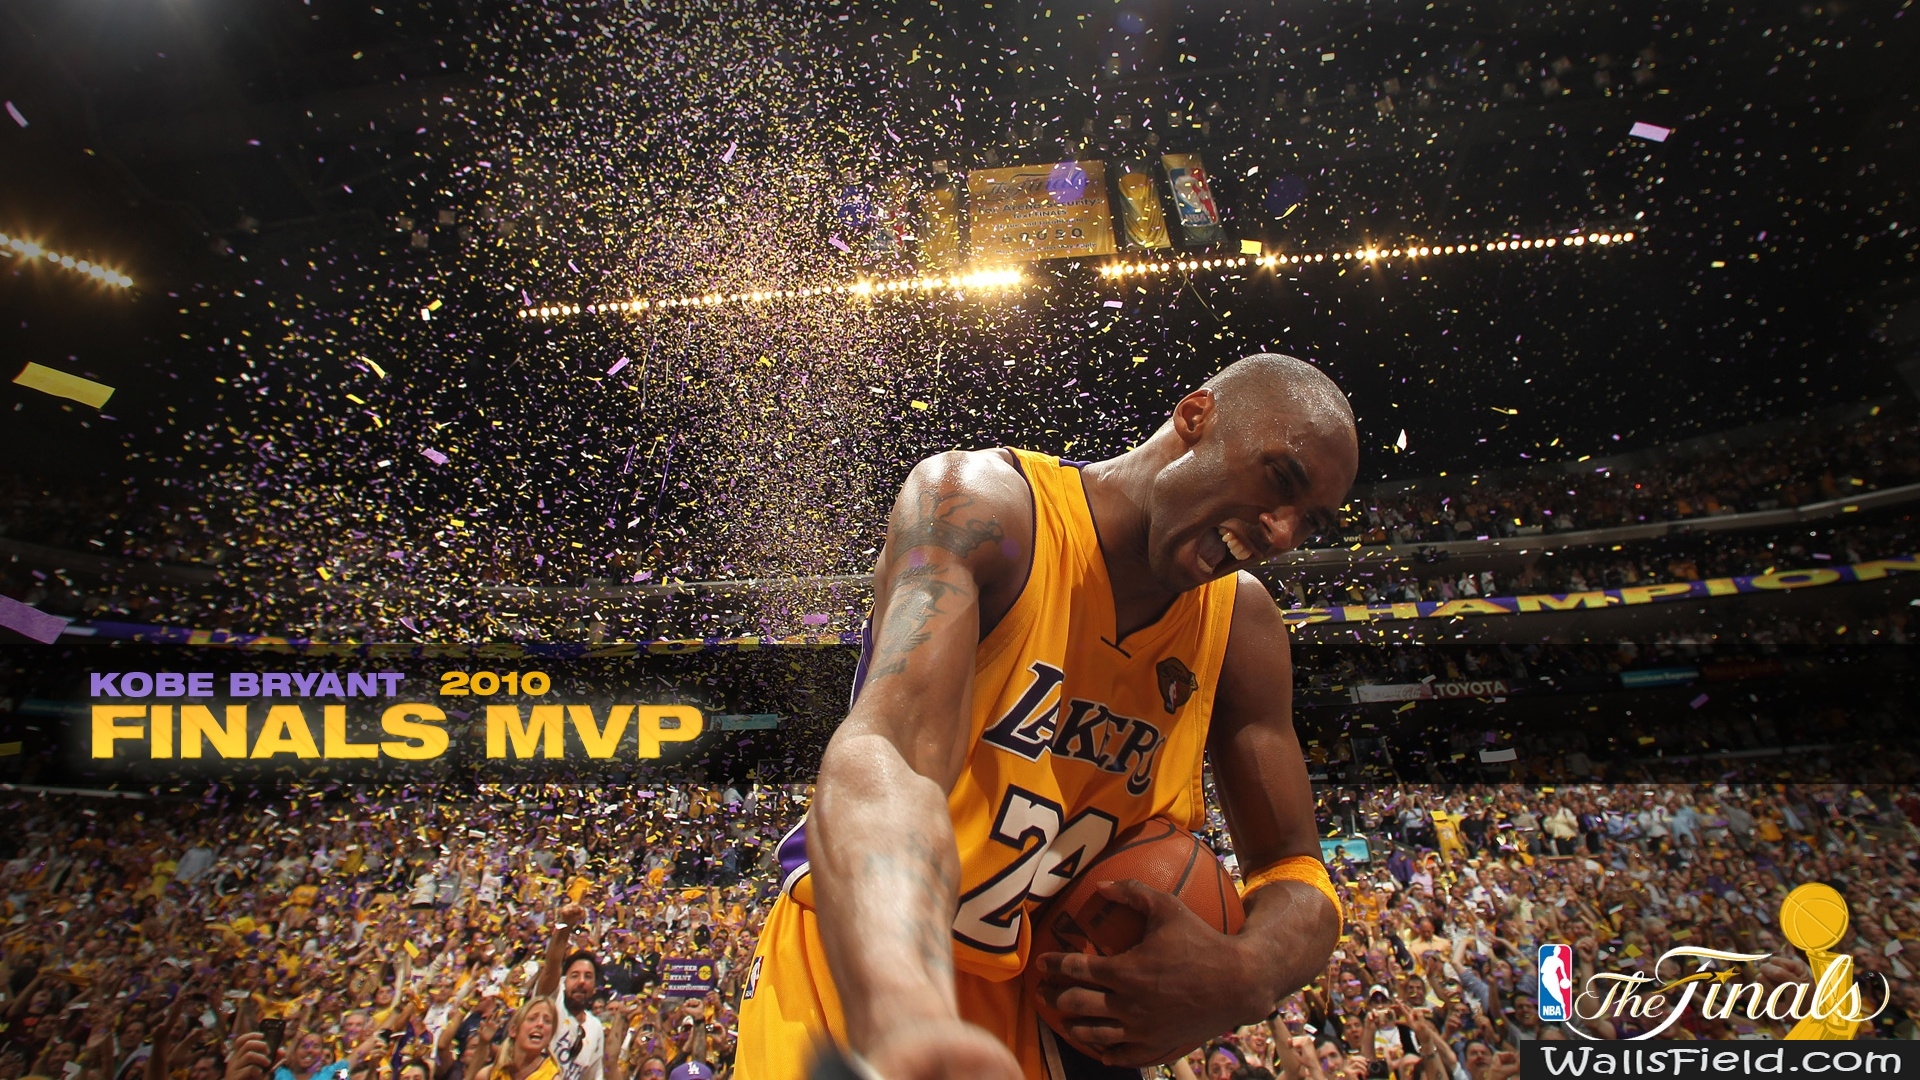 Kobe Bryant And Gigi Heaven Pictures Wallpapers